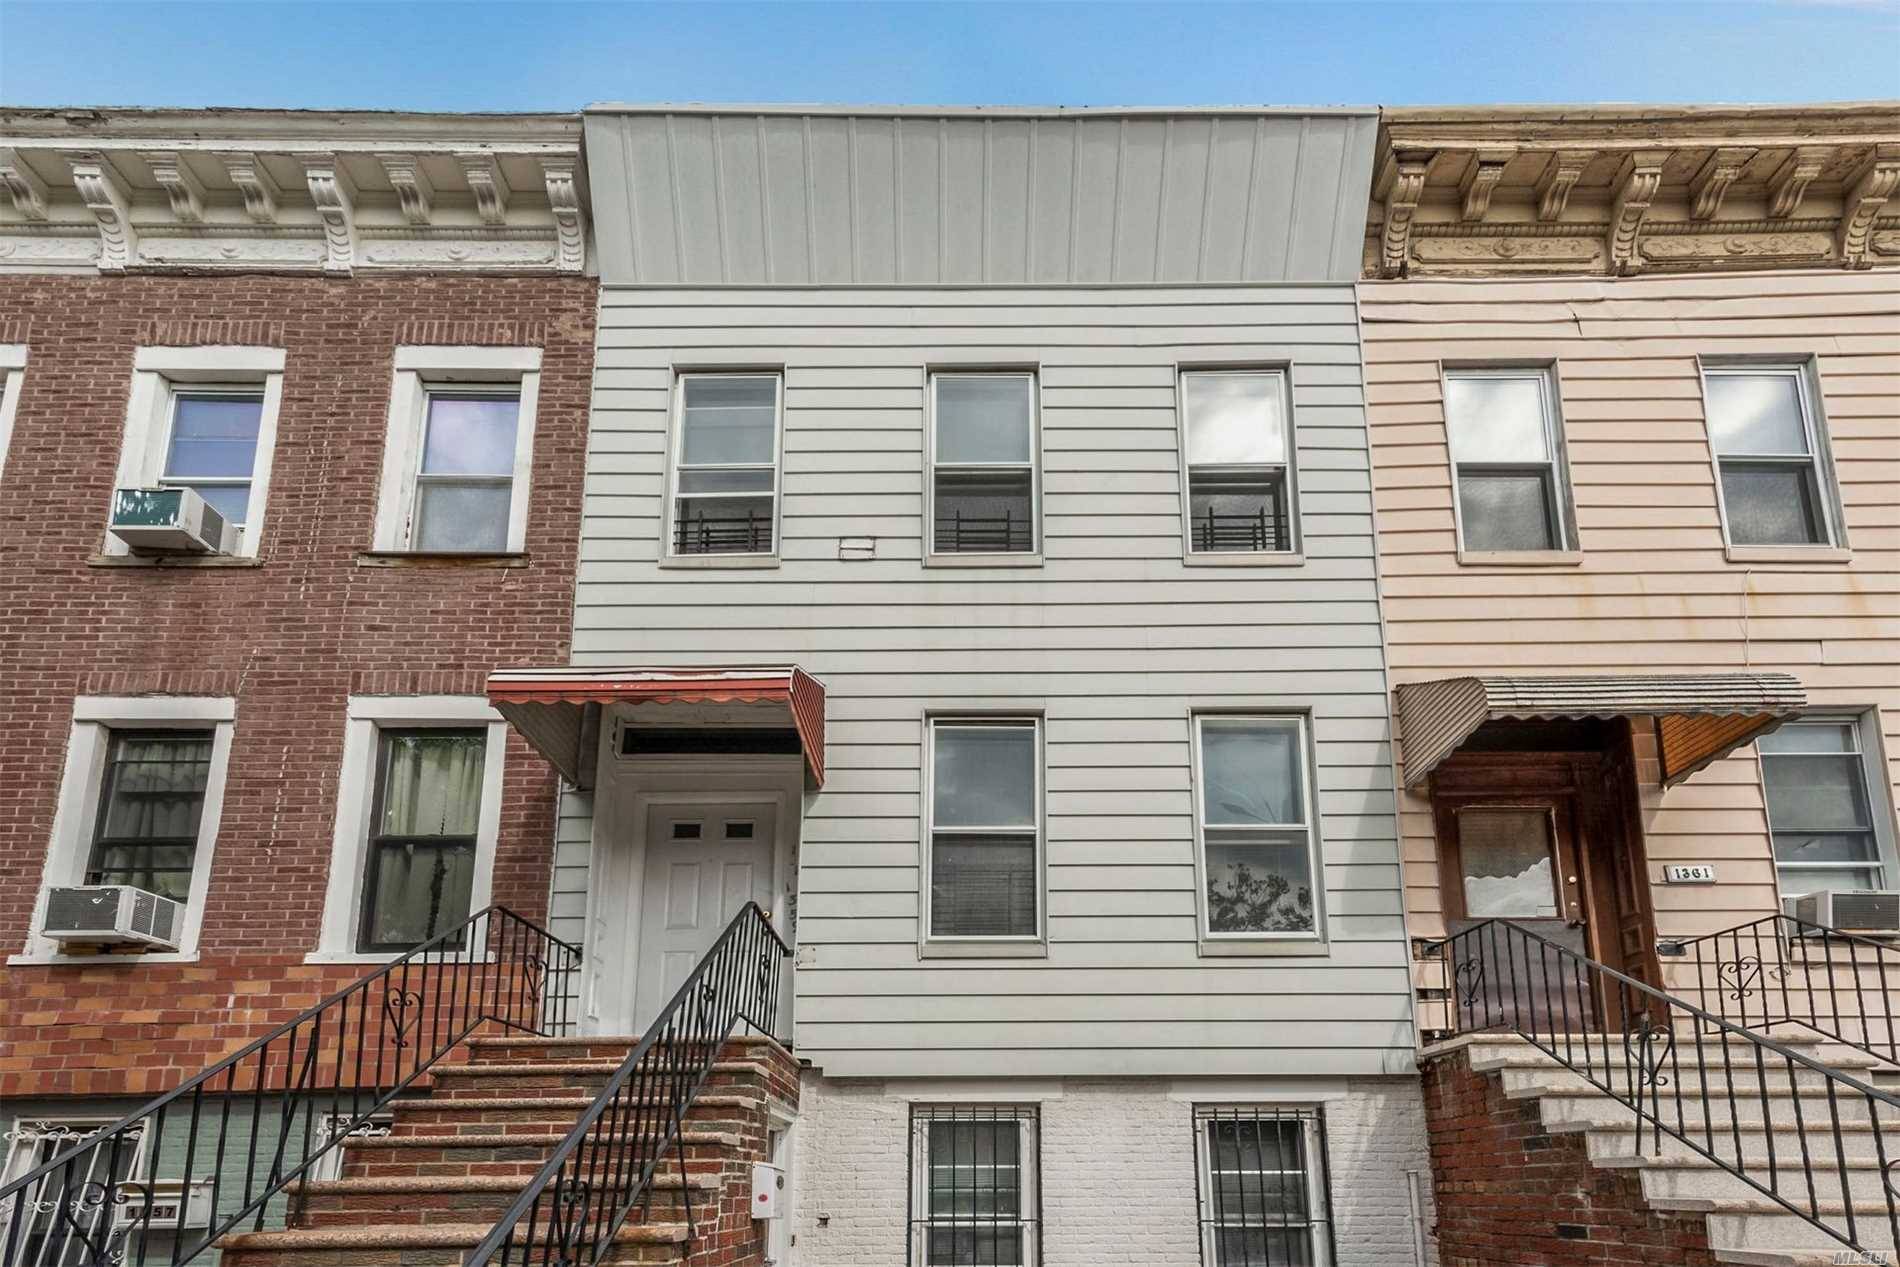 This Two Family Is In The Most Desirable Section Of Brooklyn-Crown Heights.